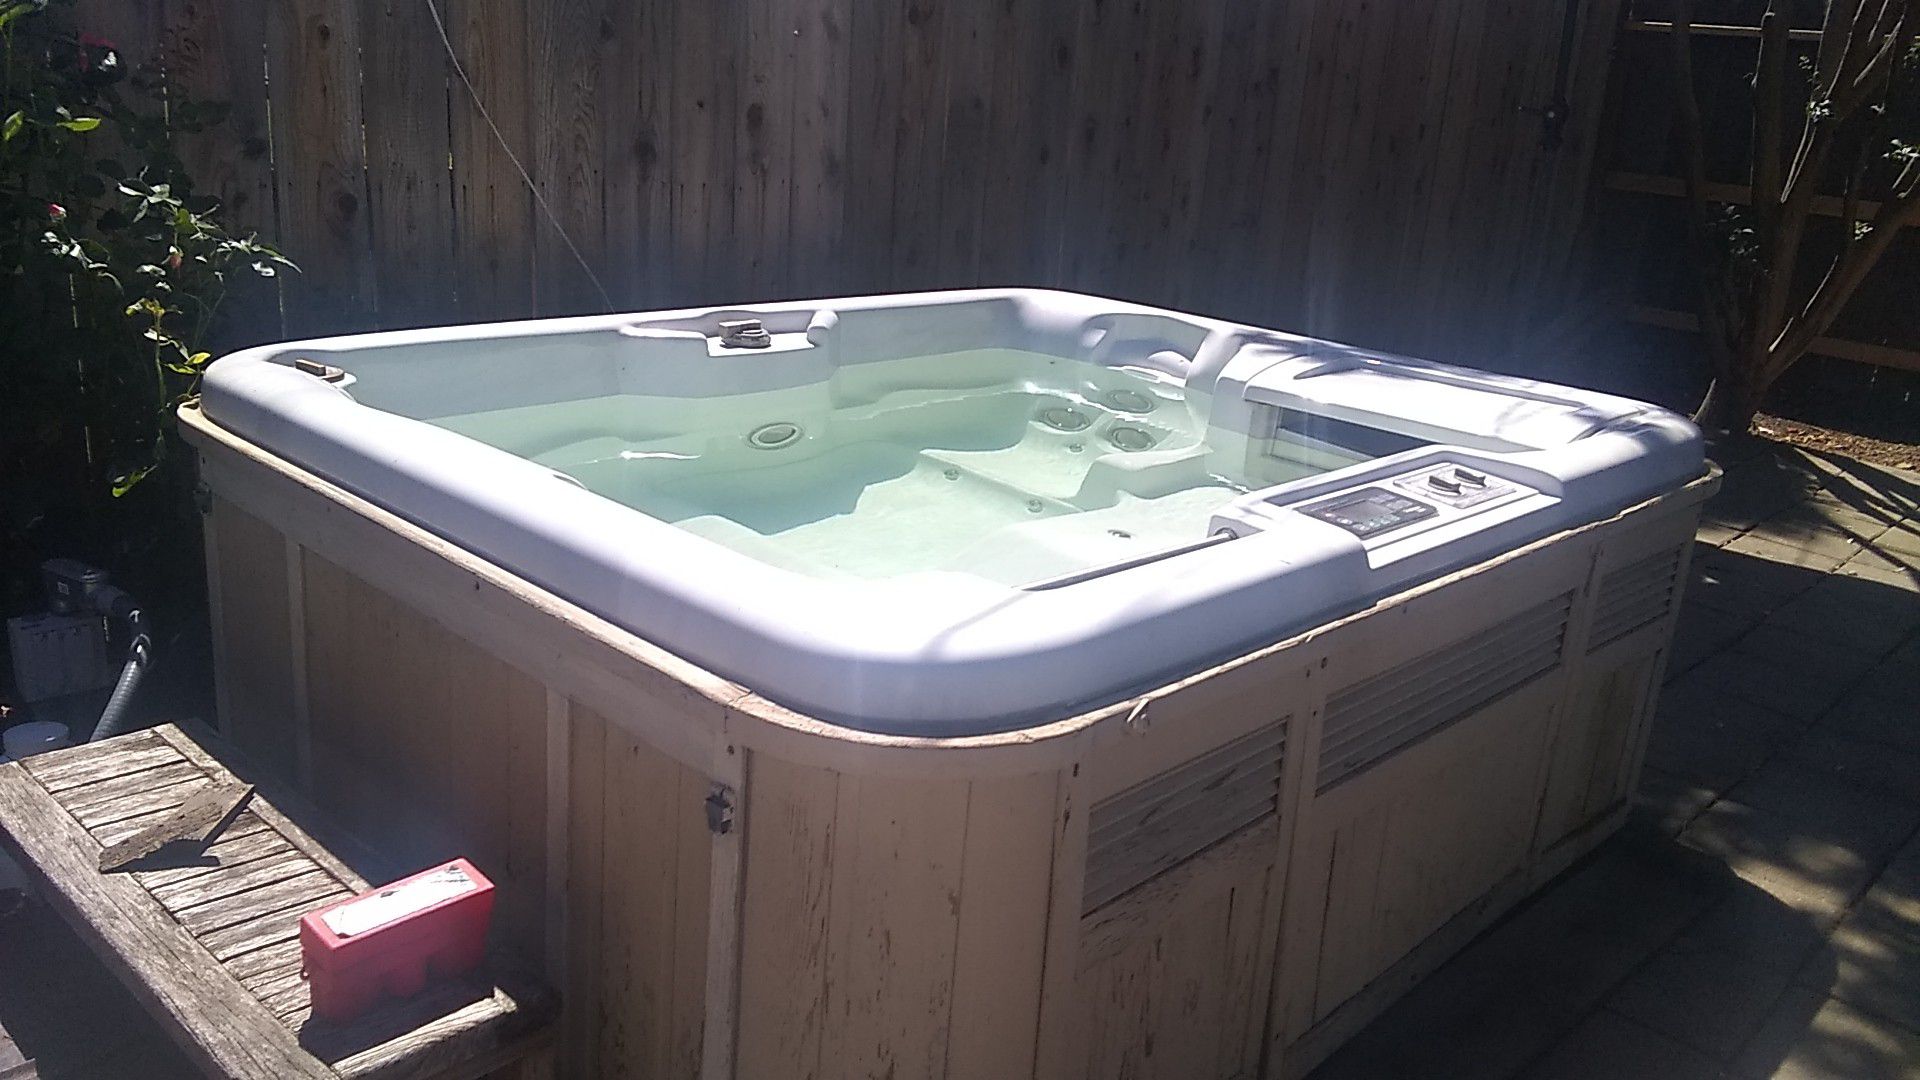 Hot tub & new cover! $250!!!